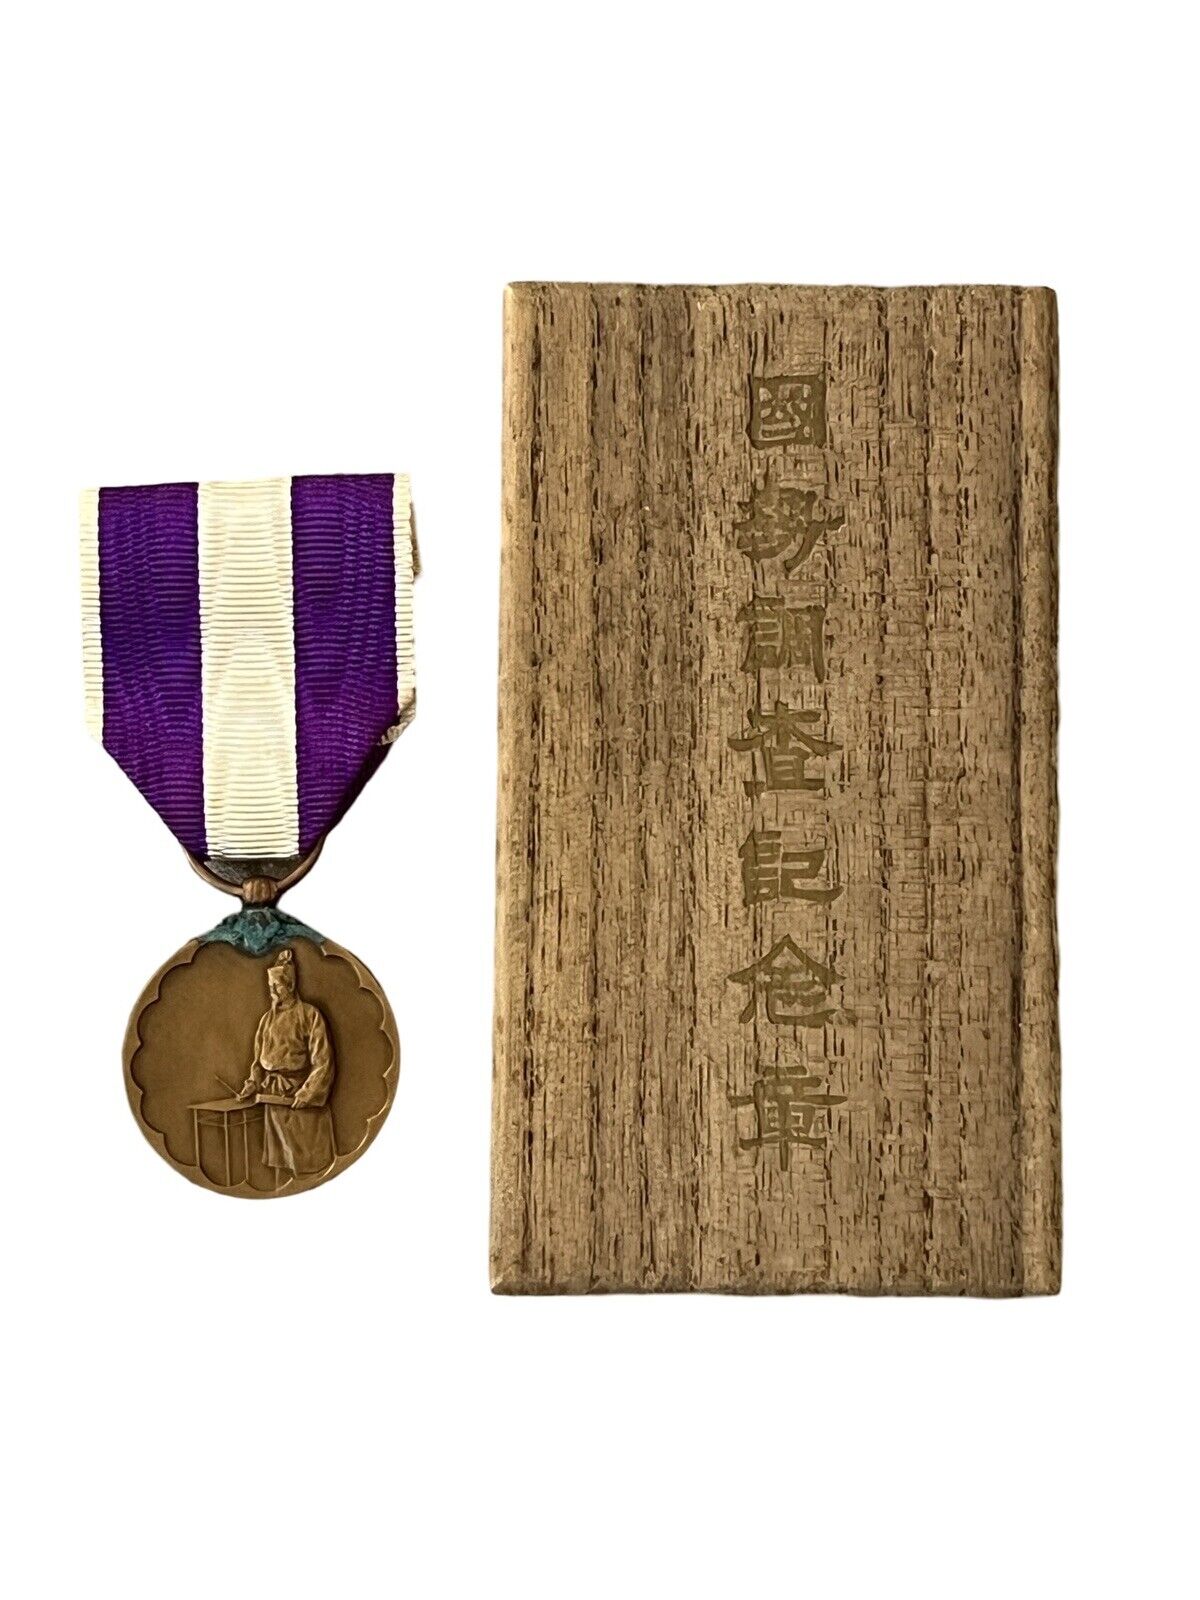 WWII WW2 Japanese 1920 Census Medal Badge Japan Purple Ribbon And Wooden Box